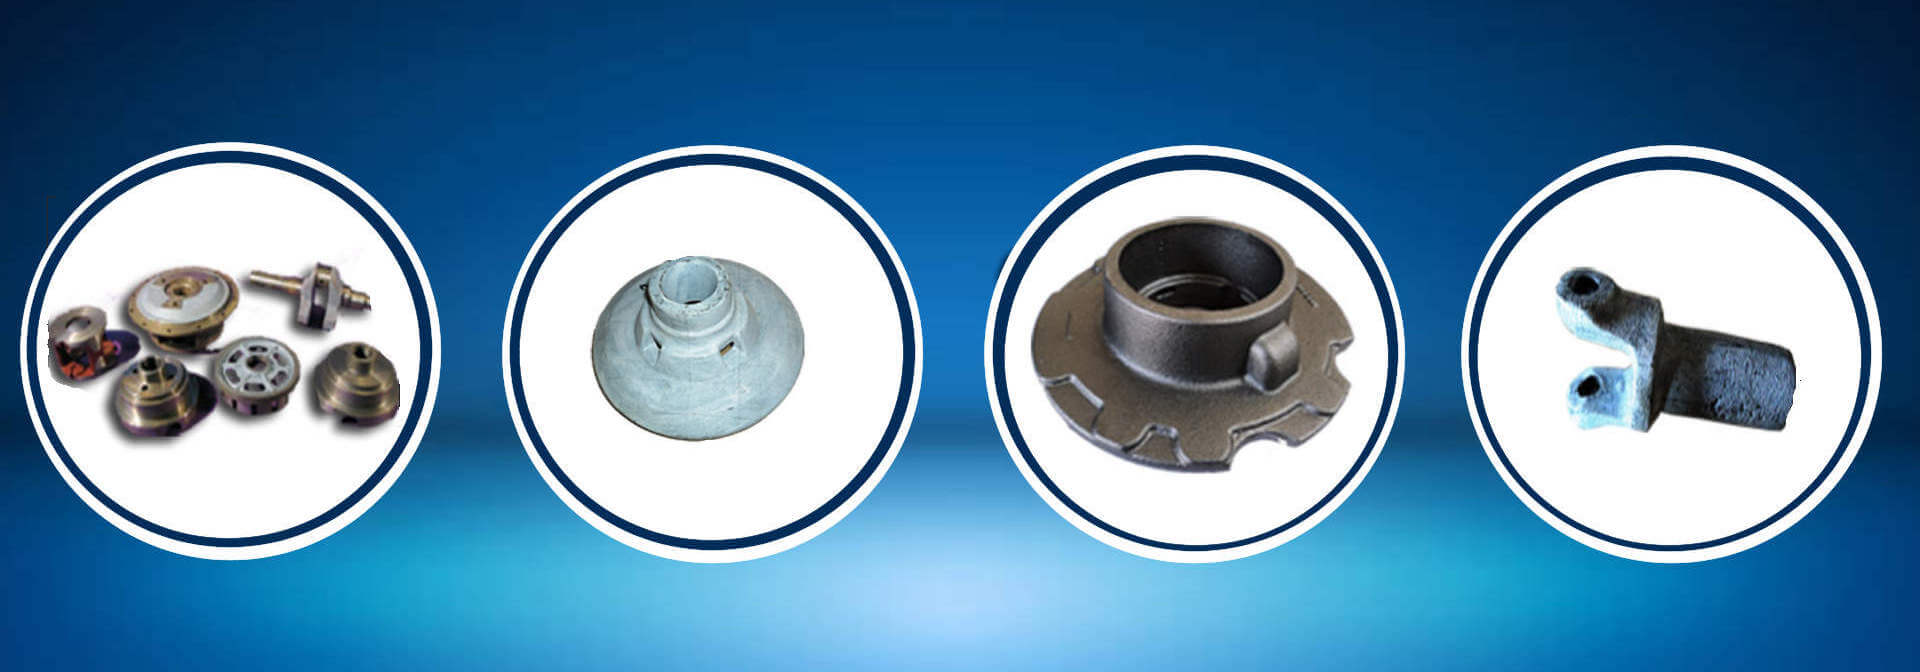 Manufacturer, Supplier Of S.G.Iron Casting, Automobile Casting, Automobile Components, Casting, Connecting Rods, Crank Shaft Casting, Diff Case, Ductile Iron Casting, Ferrous Castings, Foundry Casting, Hub Gear Carriers, Machined Components, Nodular Iron Casting, Sg Iron Castings, Spheroidal Graphite Casting, Bearing Cap Casings, Bearing Housings Casings, Adjuster Ring Casting, End Collar Casings.